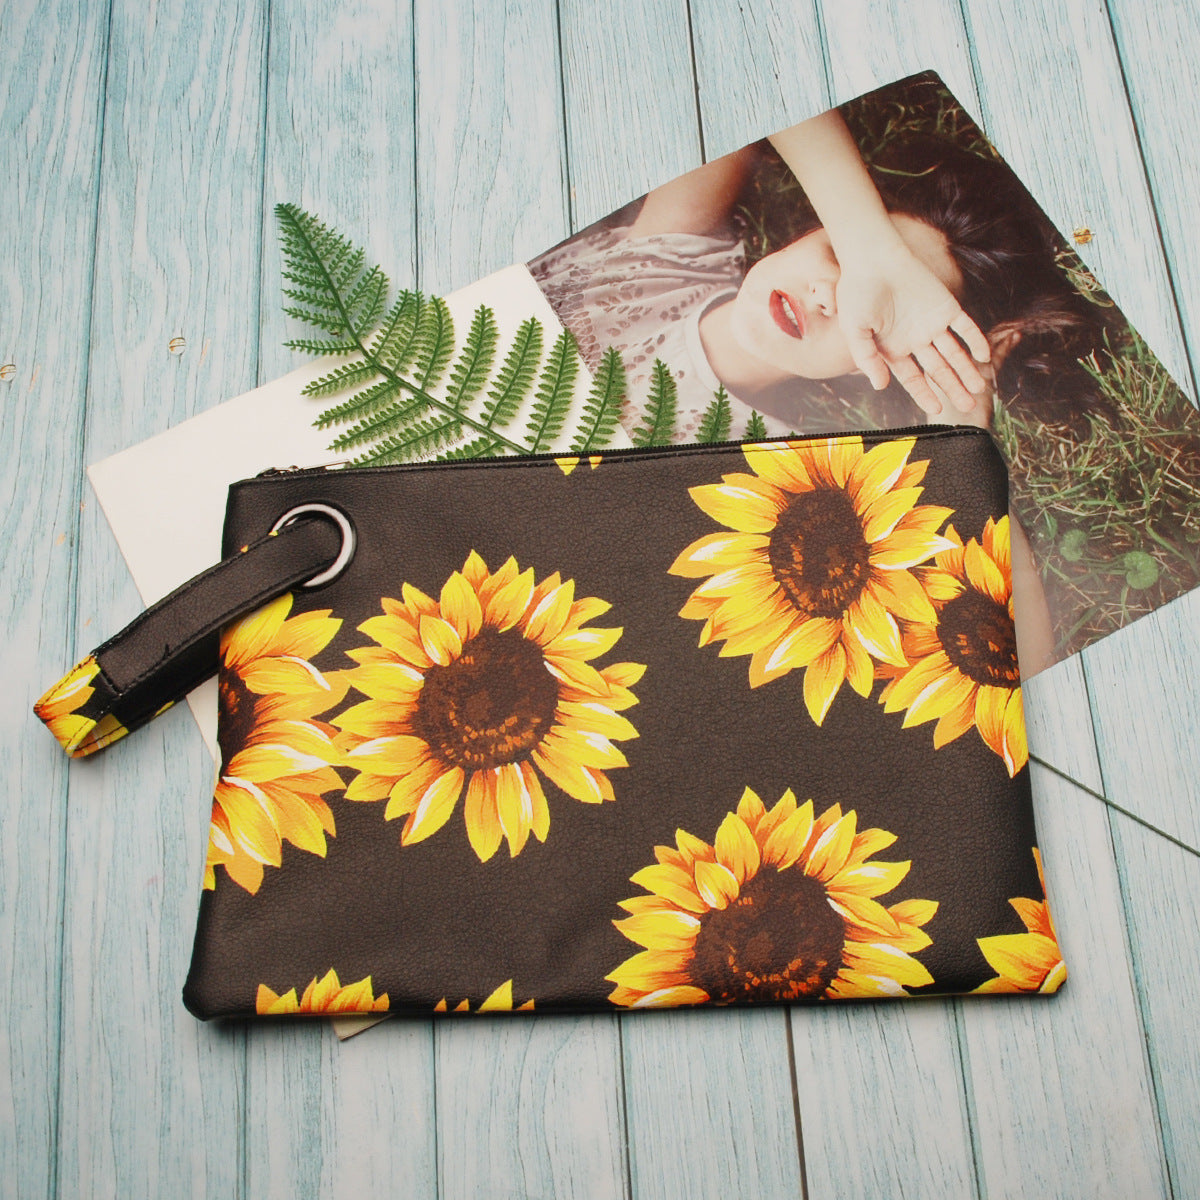 Women Sunflower Print Pu Leather Evening Clutch Bags-Handbags, Wallets & Cases-Yellow-Free Shipping Leatheretro